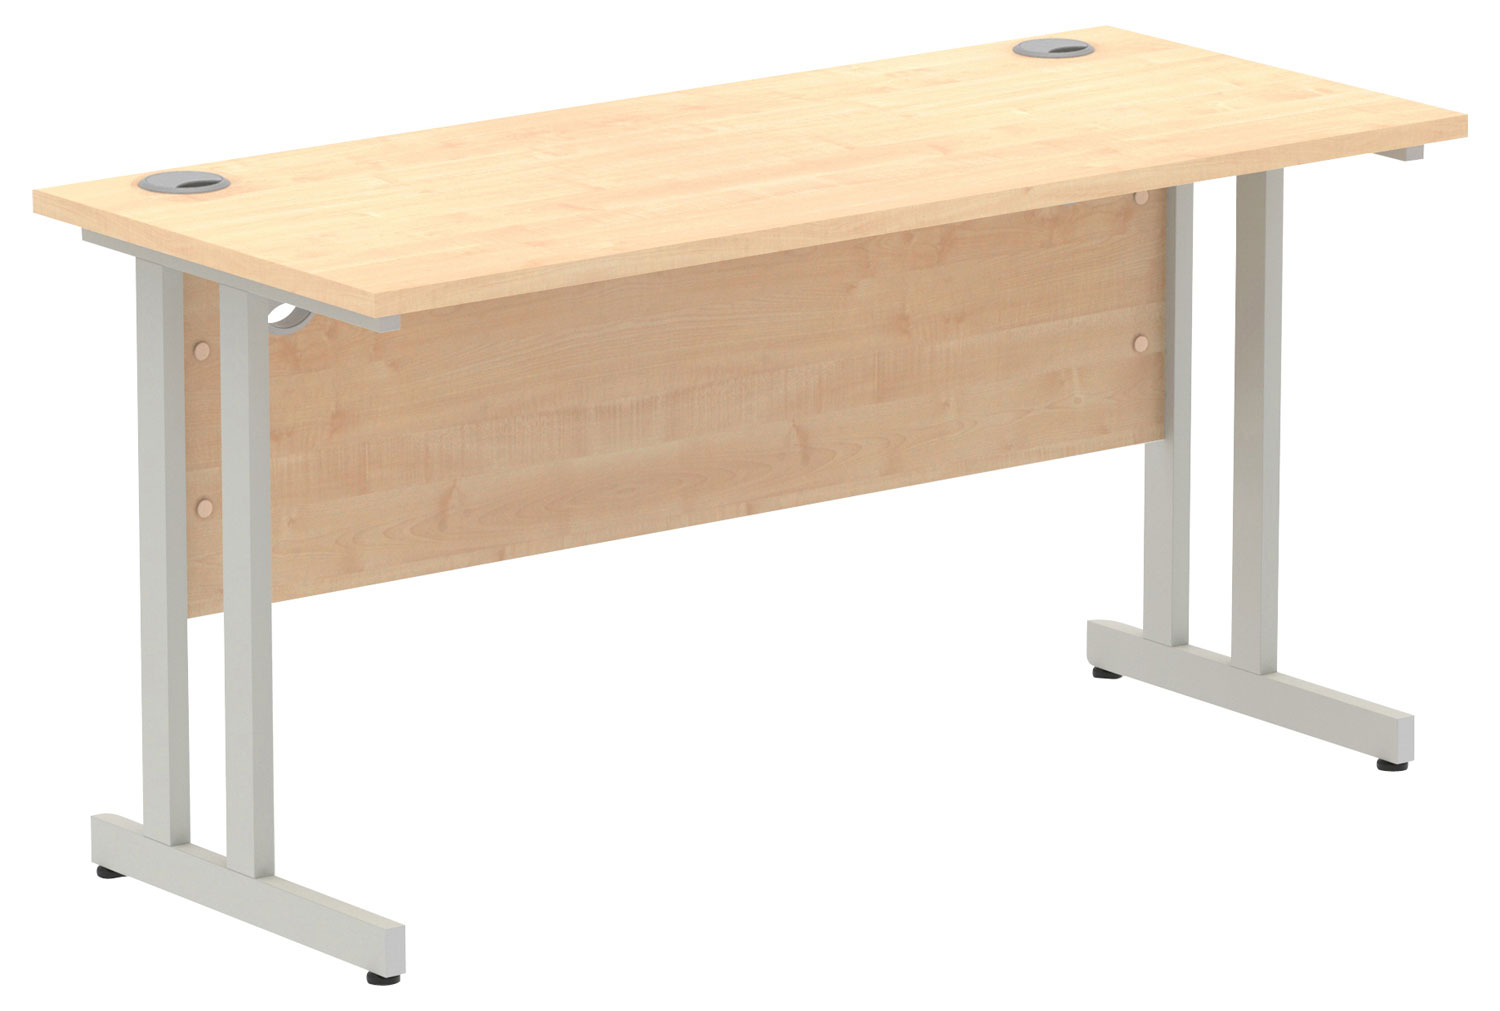 All Maple Narrow C-Leg Rectangular Office Desk, 140wx60dx73h (cm), Silver Frame, Express Delivery